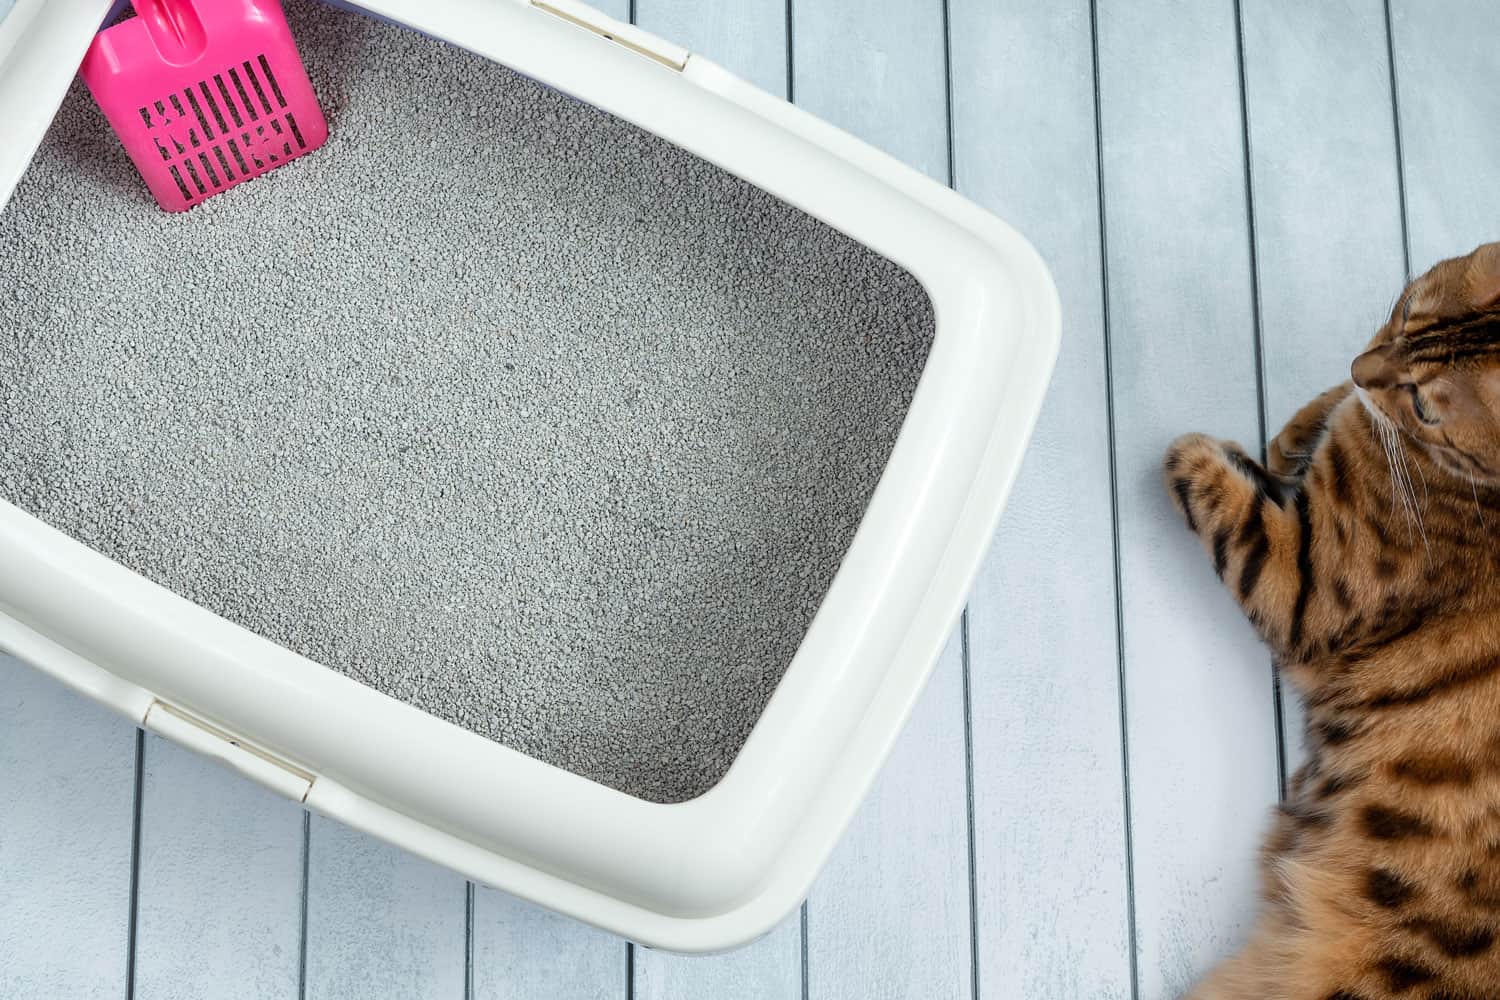 A cat litter tray with sand, a pink scoop, and a Bengal cat.